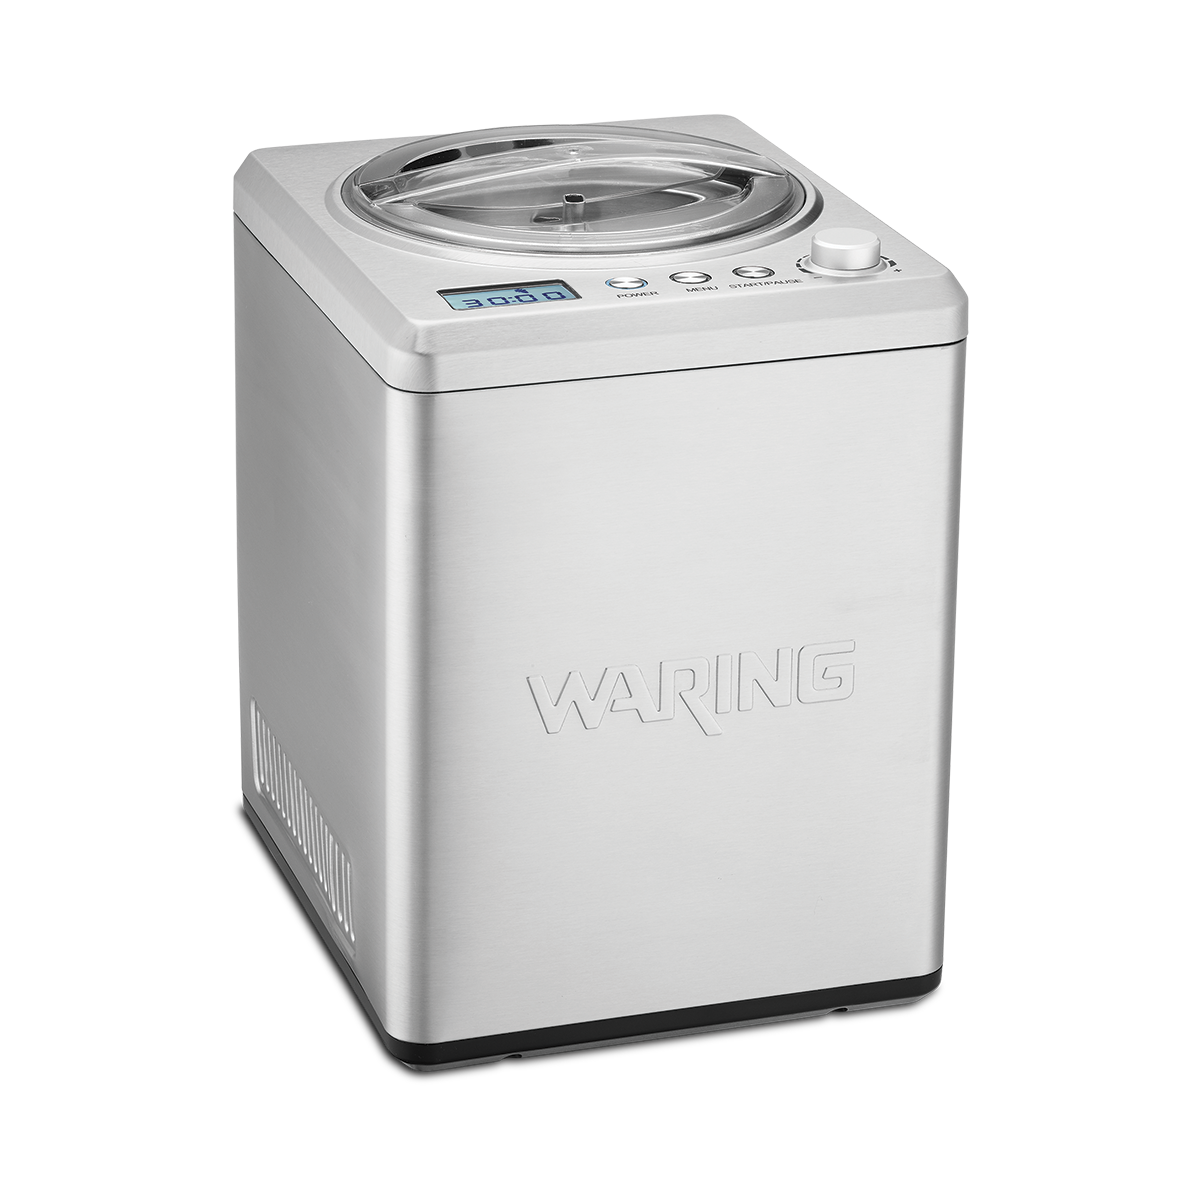 https://www.waringcommercialproducts.com/files/products/waring-wcic25-ice-cream-maker.png